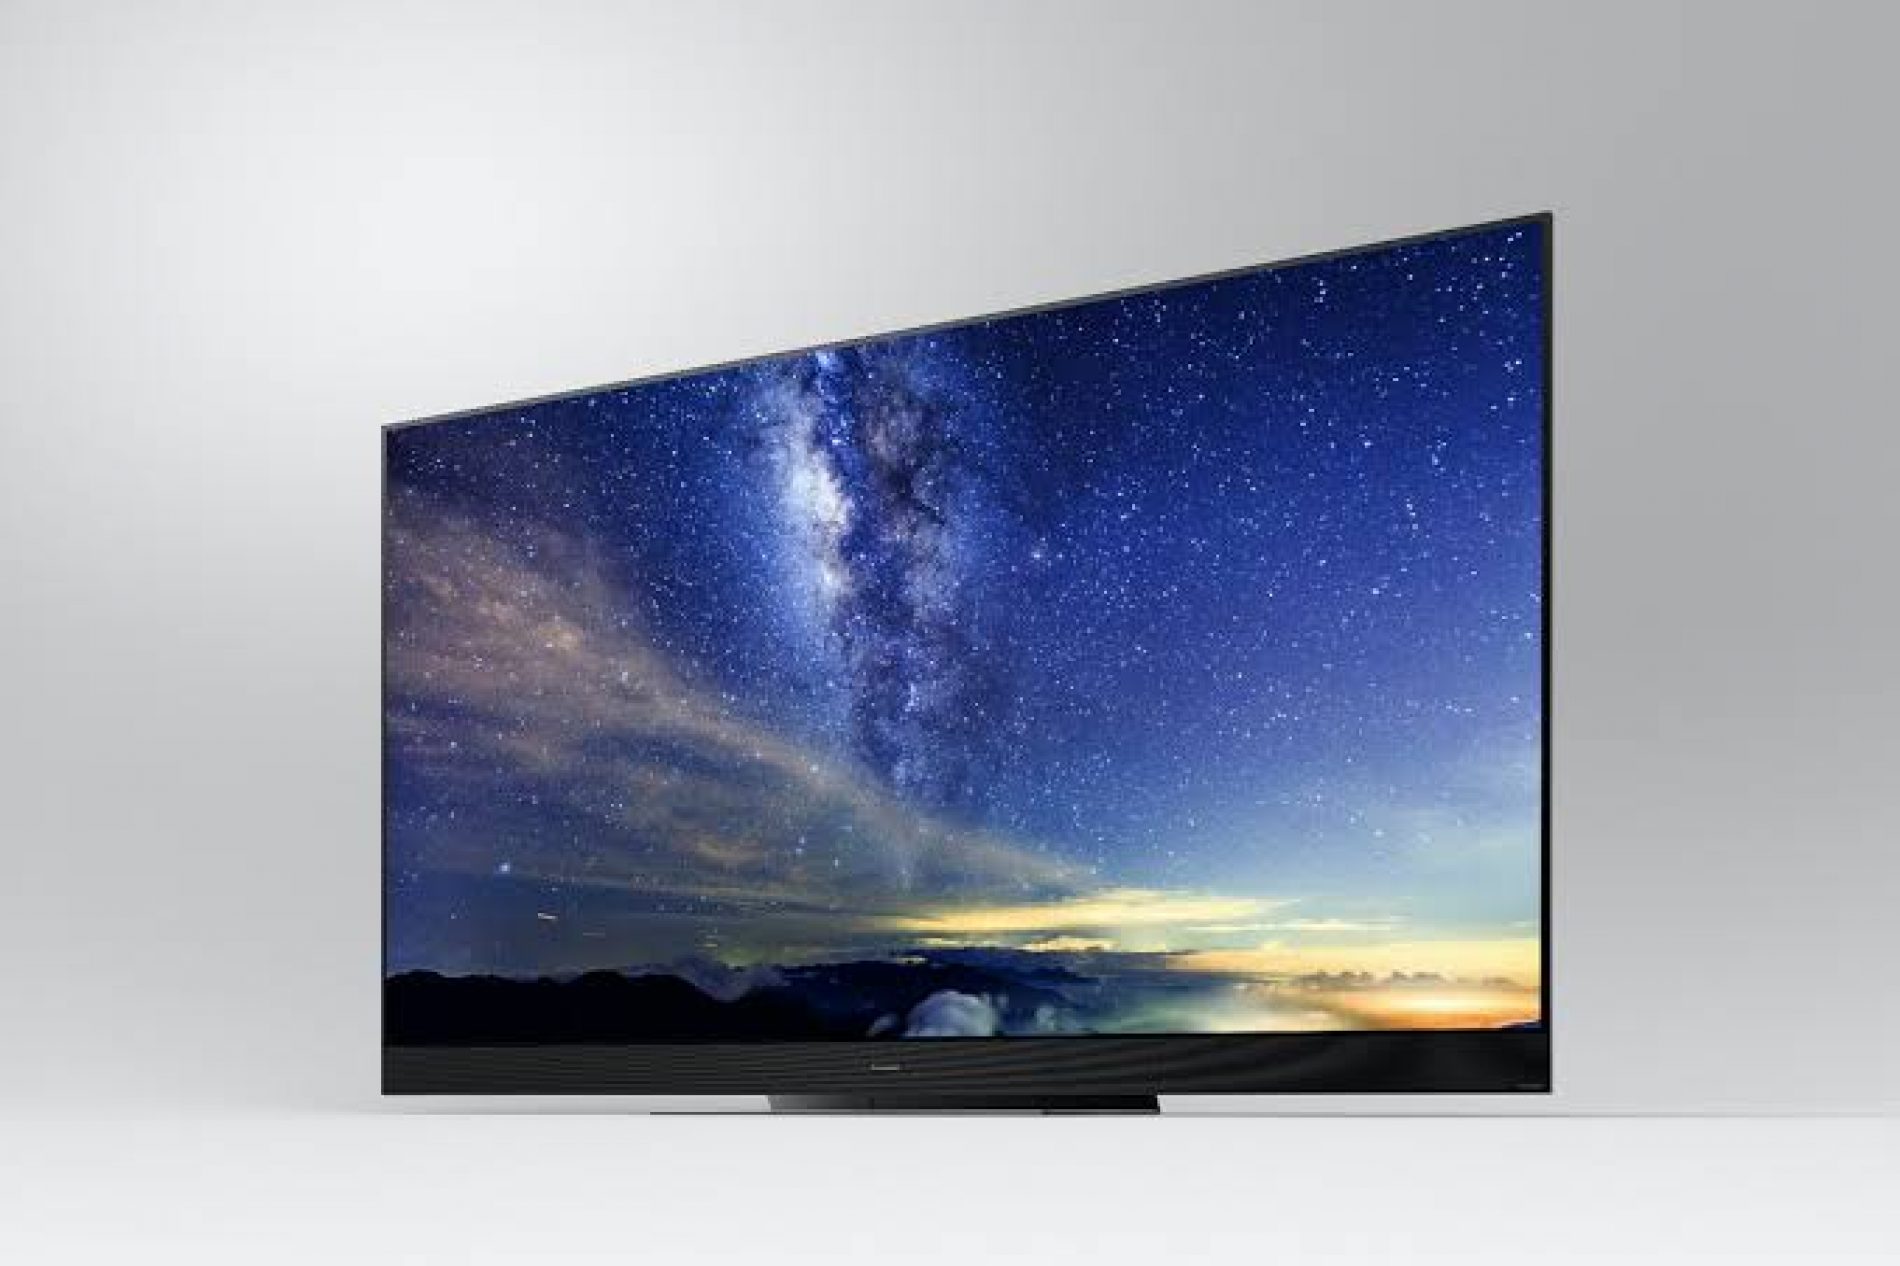 Panasonic announces ‘world’s most cinematic TV’ with built-in Dolby Atmos speakers